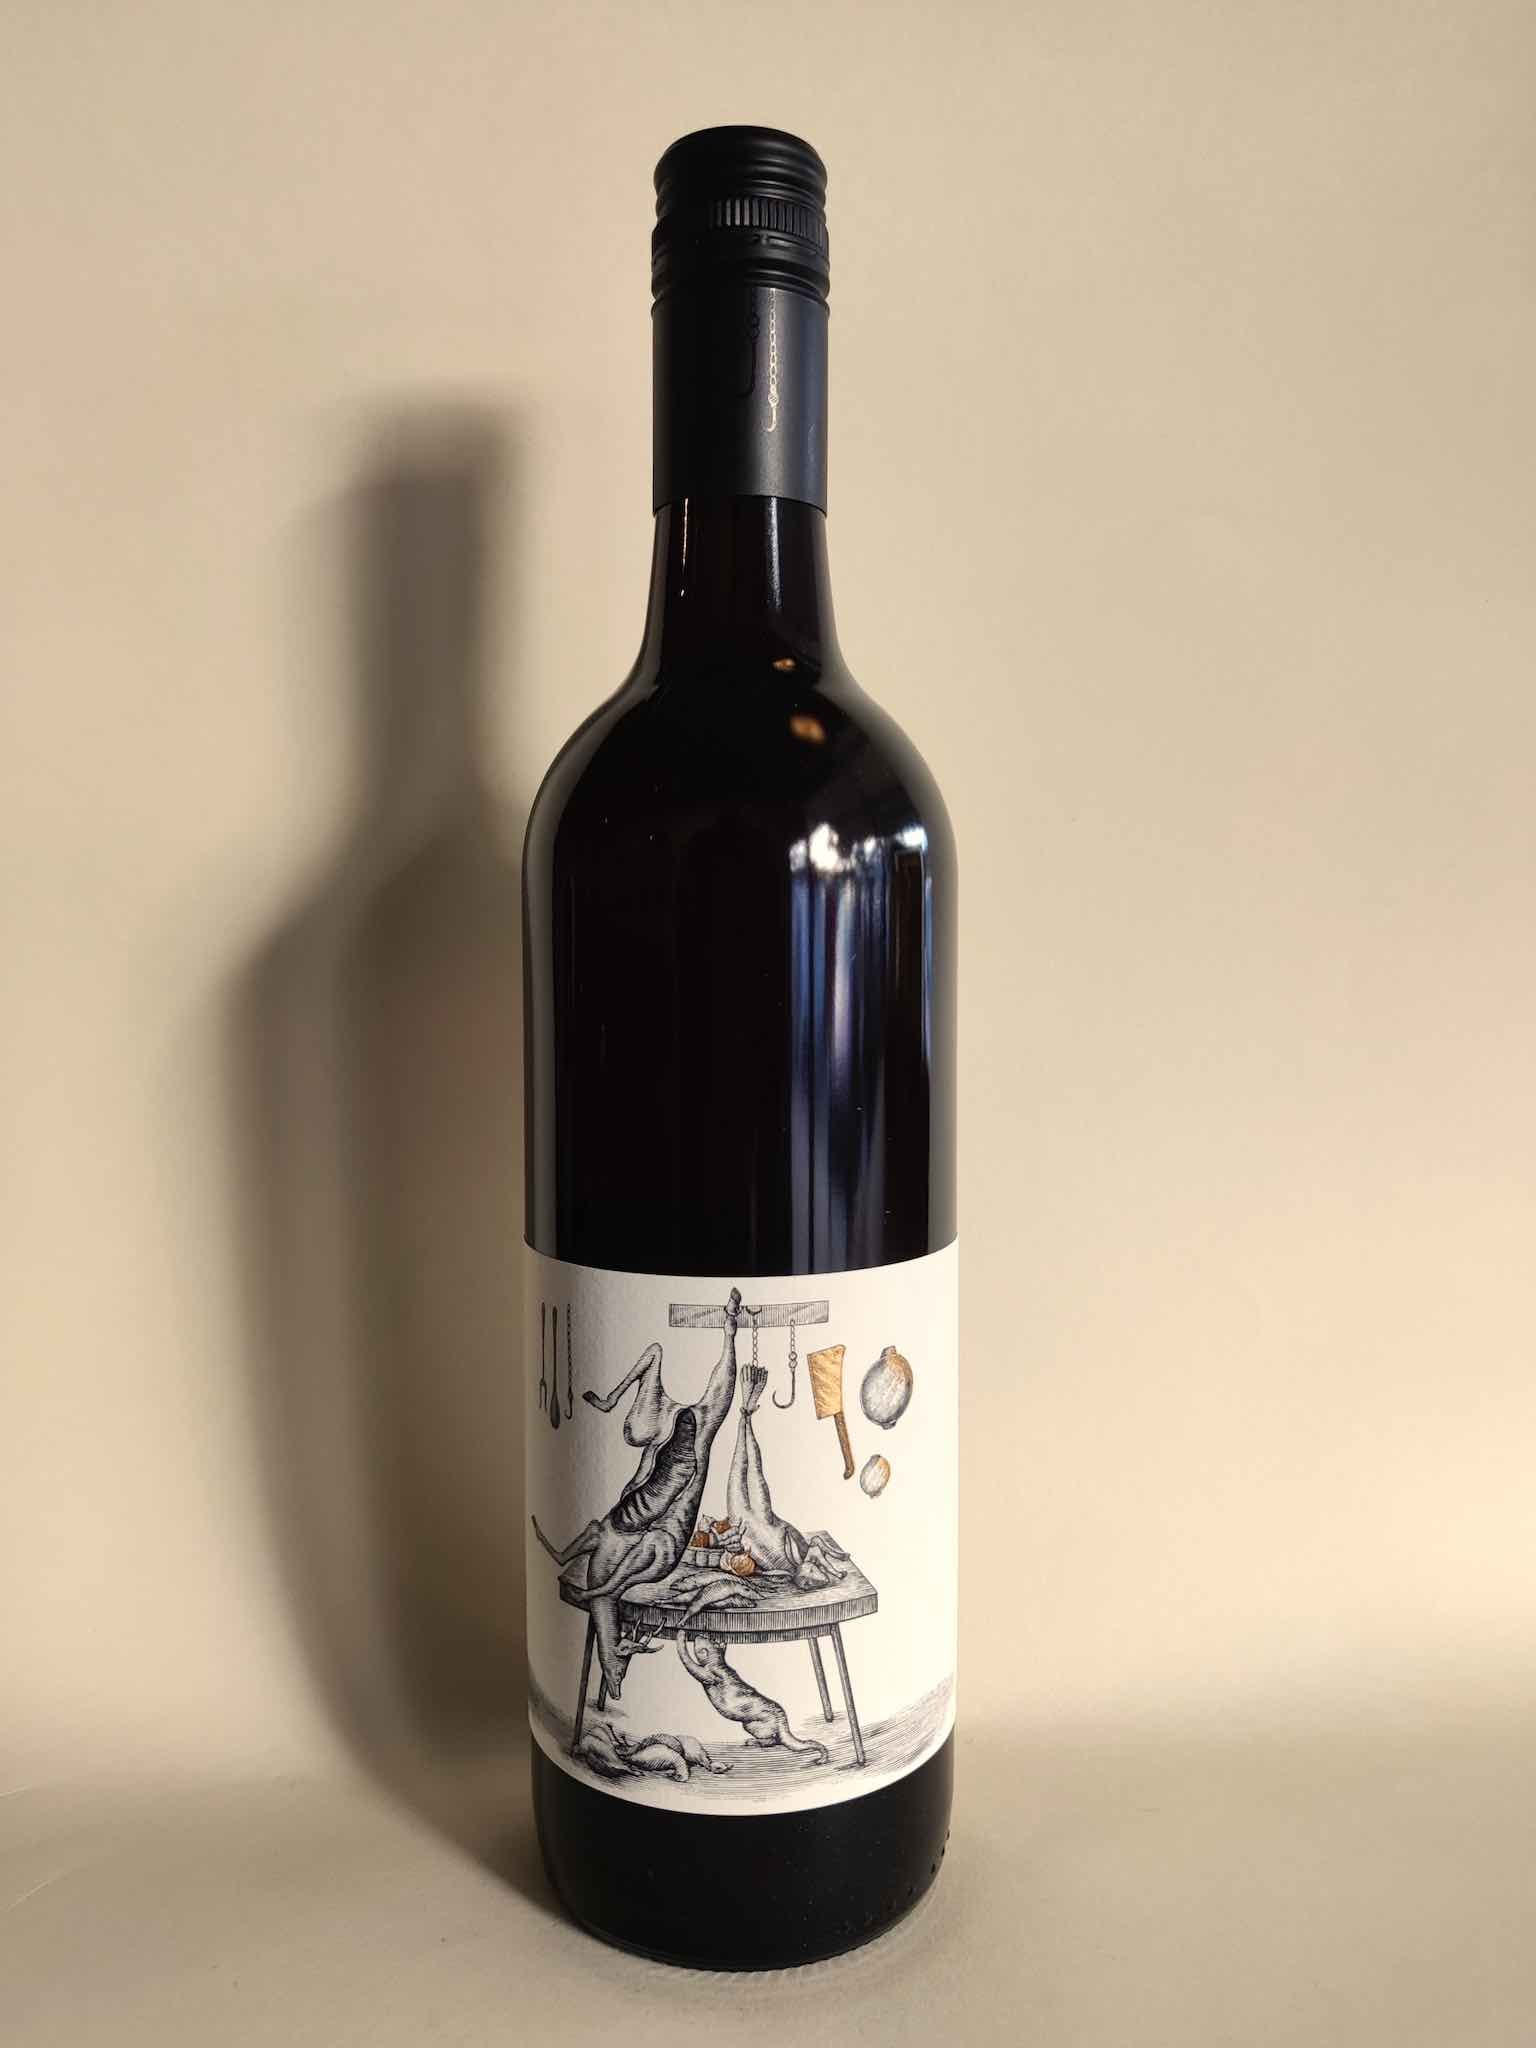 A bottle of Ravensworth Regional Sangiovese from Murrumbateman, New South Wales. 